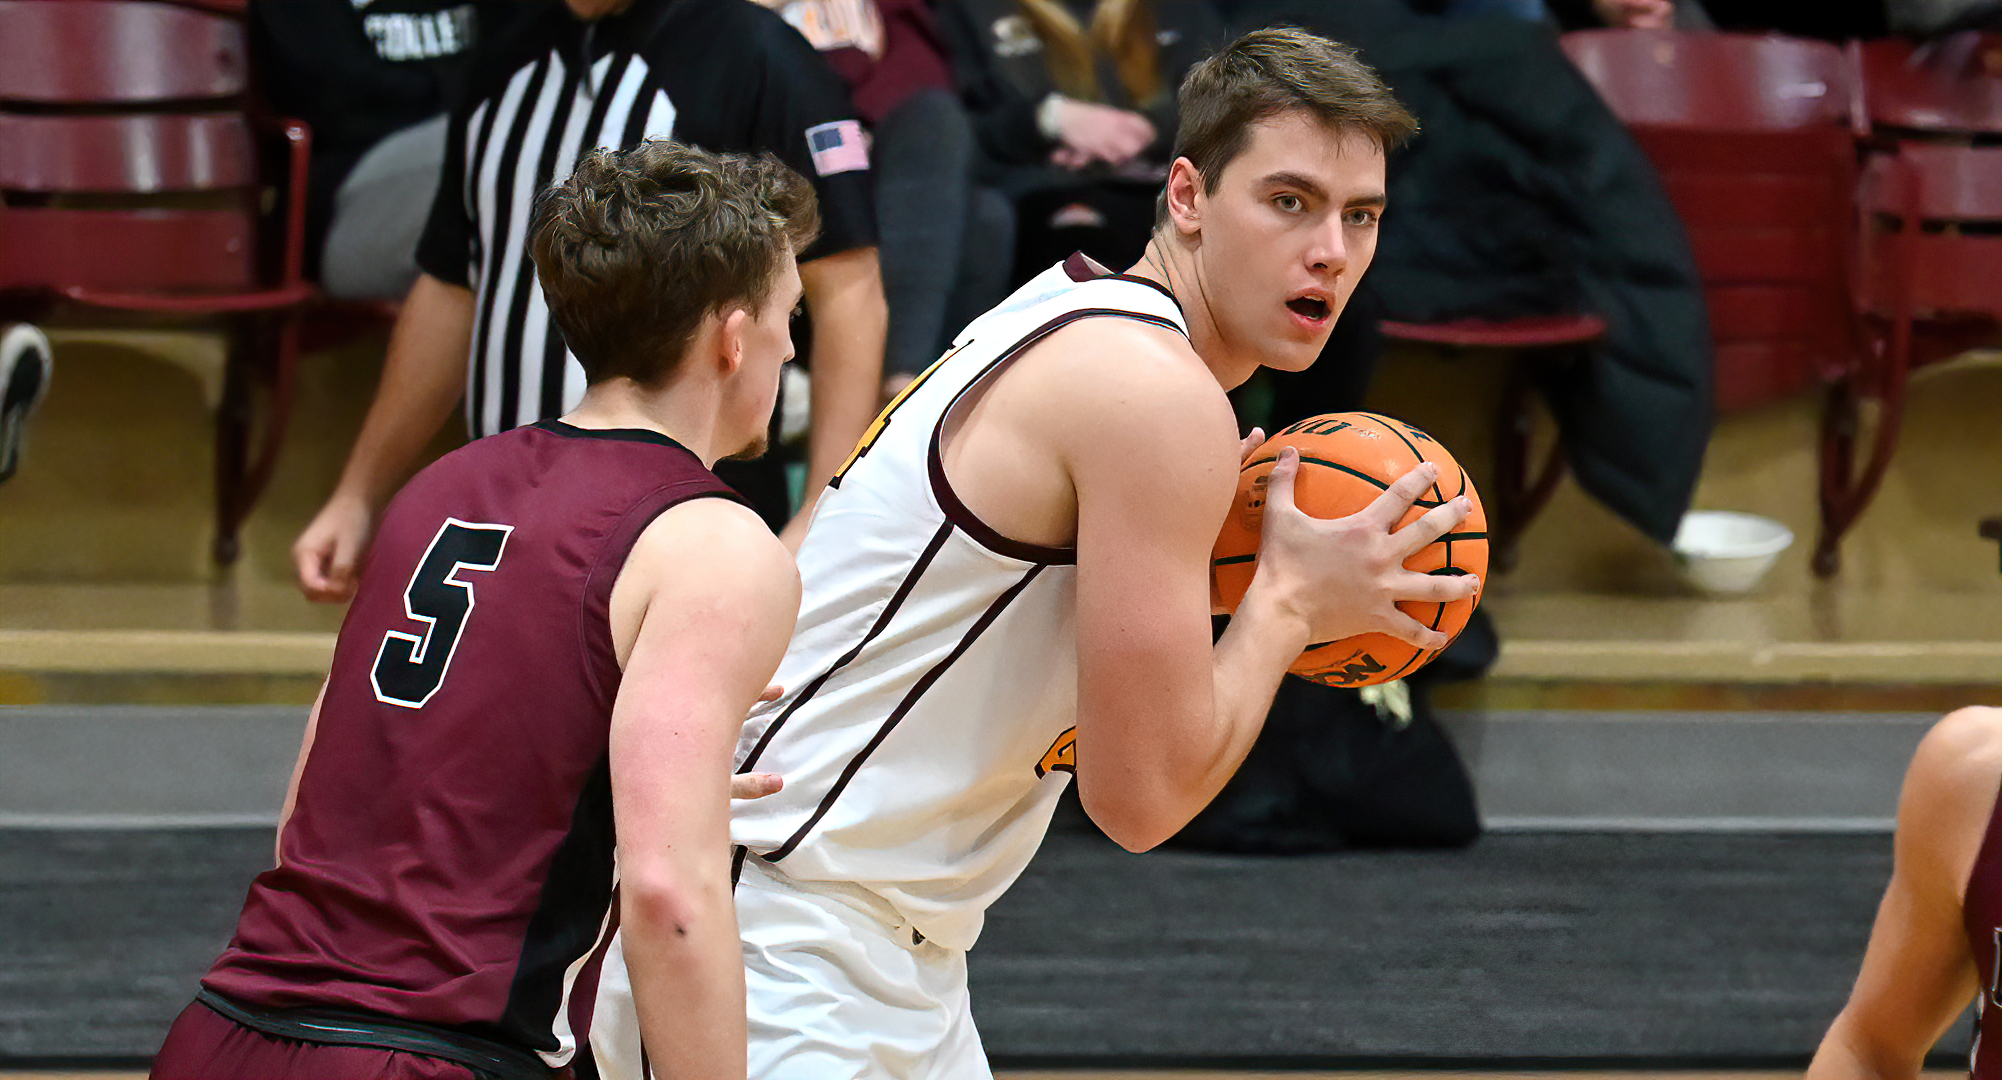 Jackson Loge went 12-for-16 from the floor and scored a career-high 27 points in the Cobbers game at Crown.